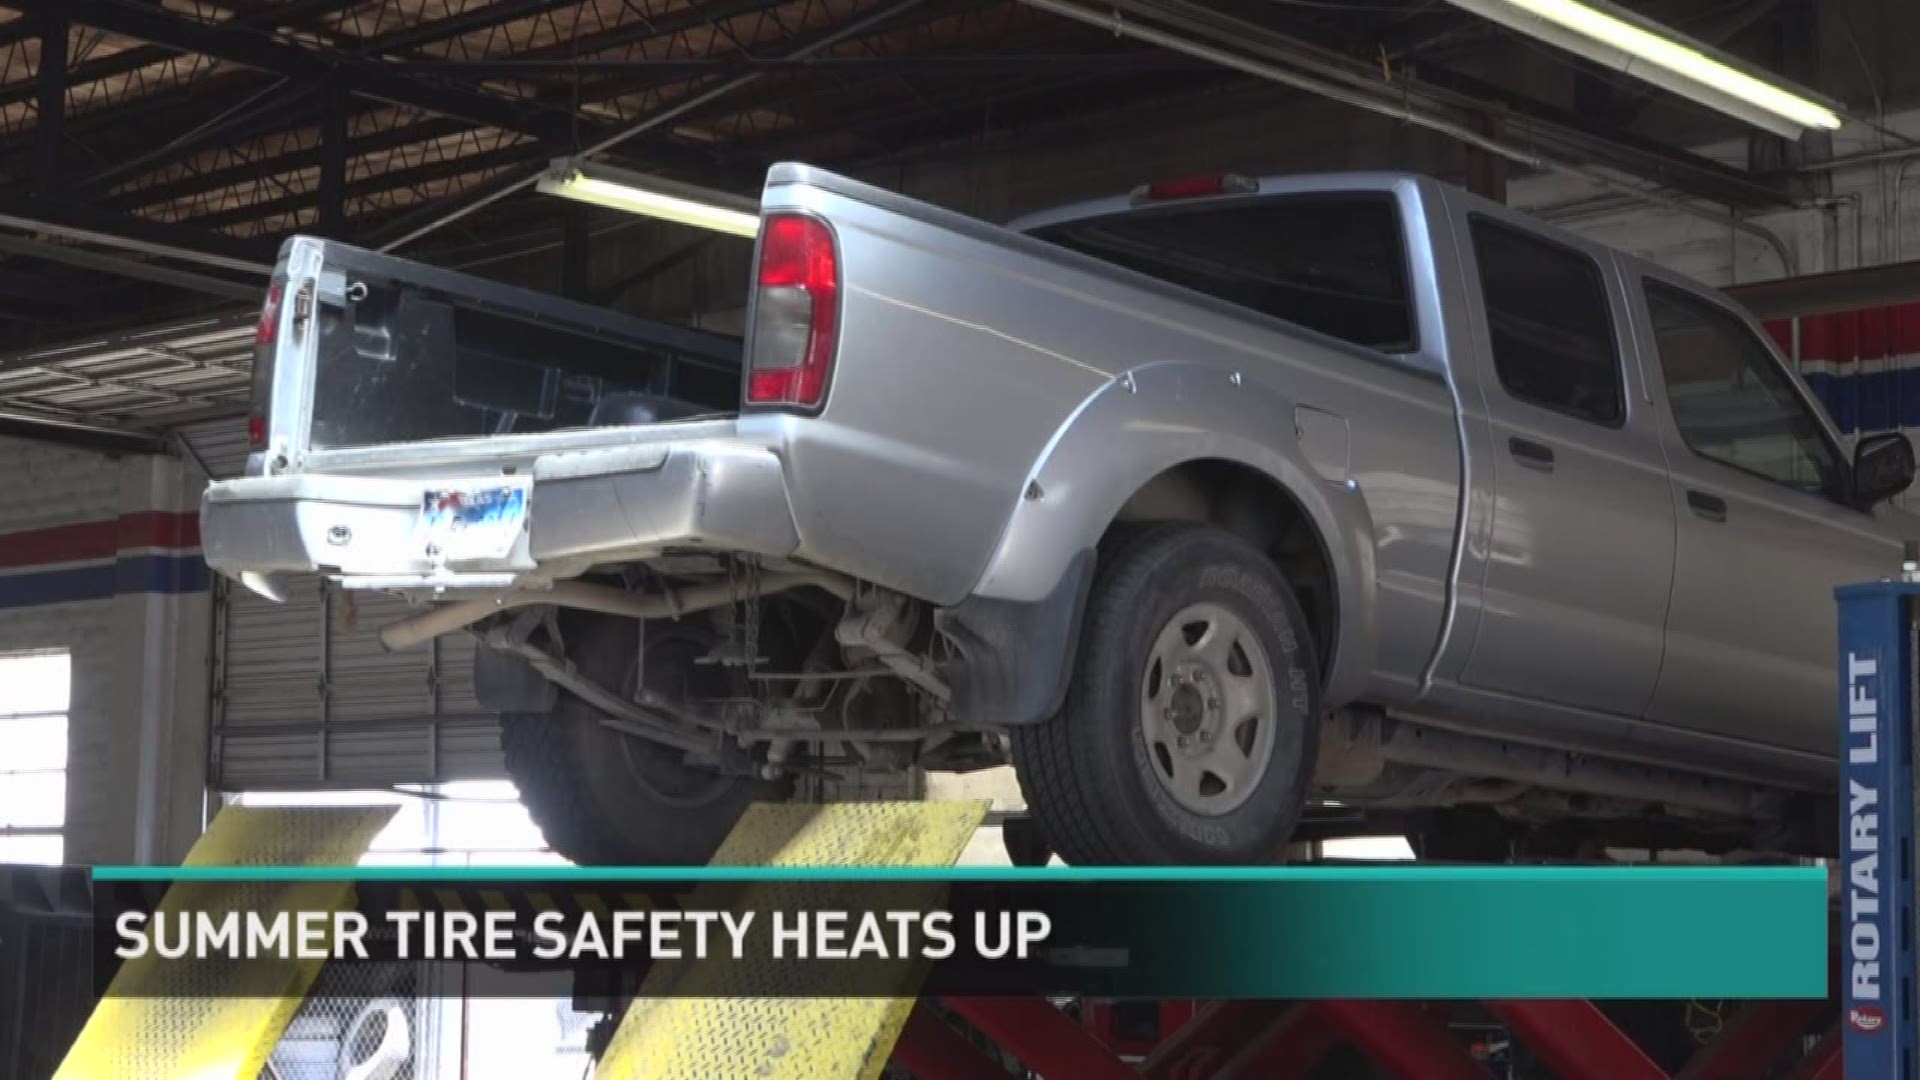 With our summer temperatures, the heat may cause damage to your tires.